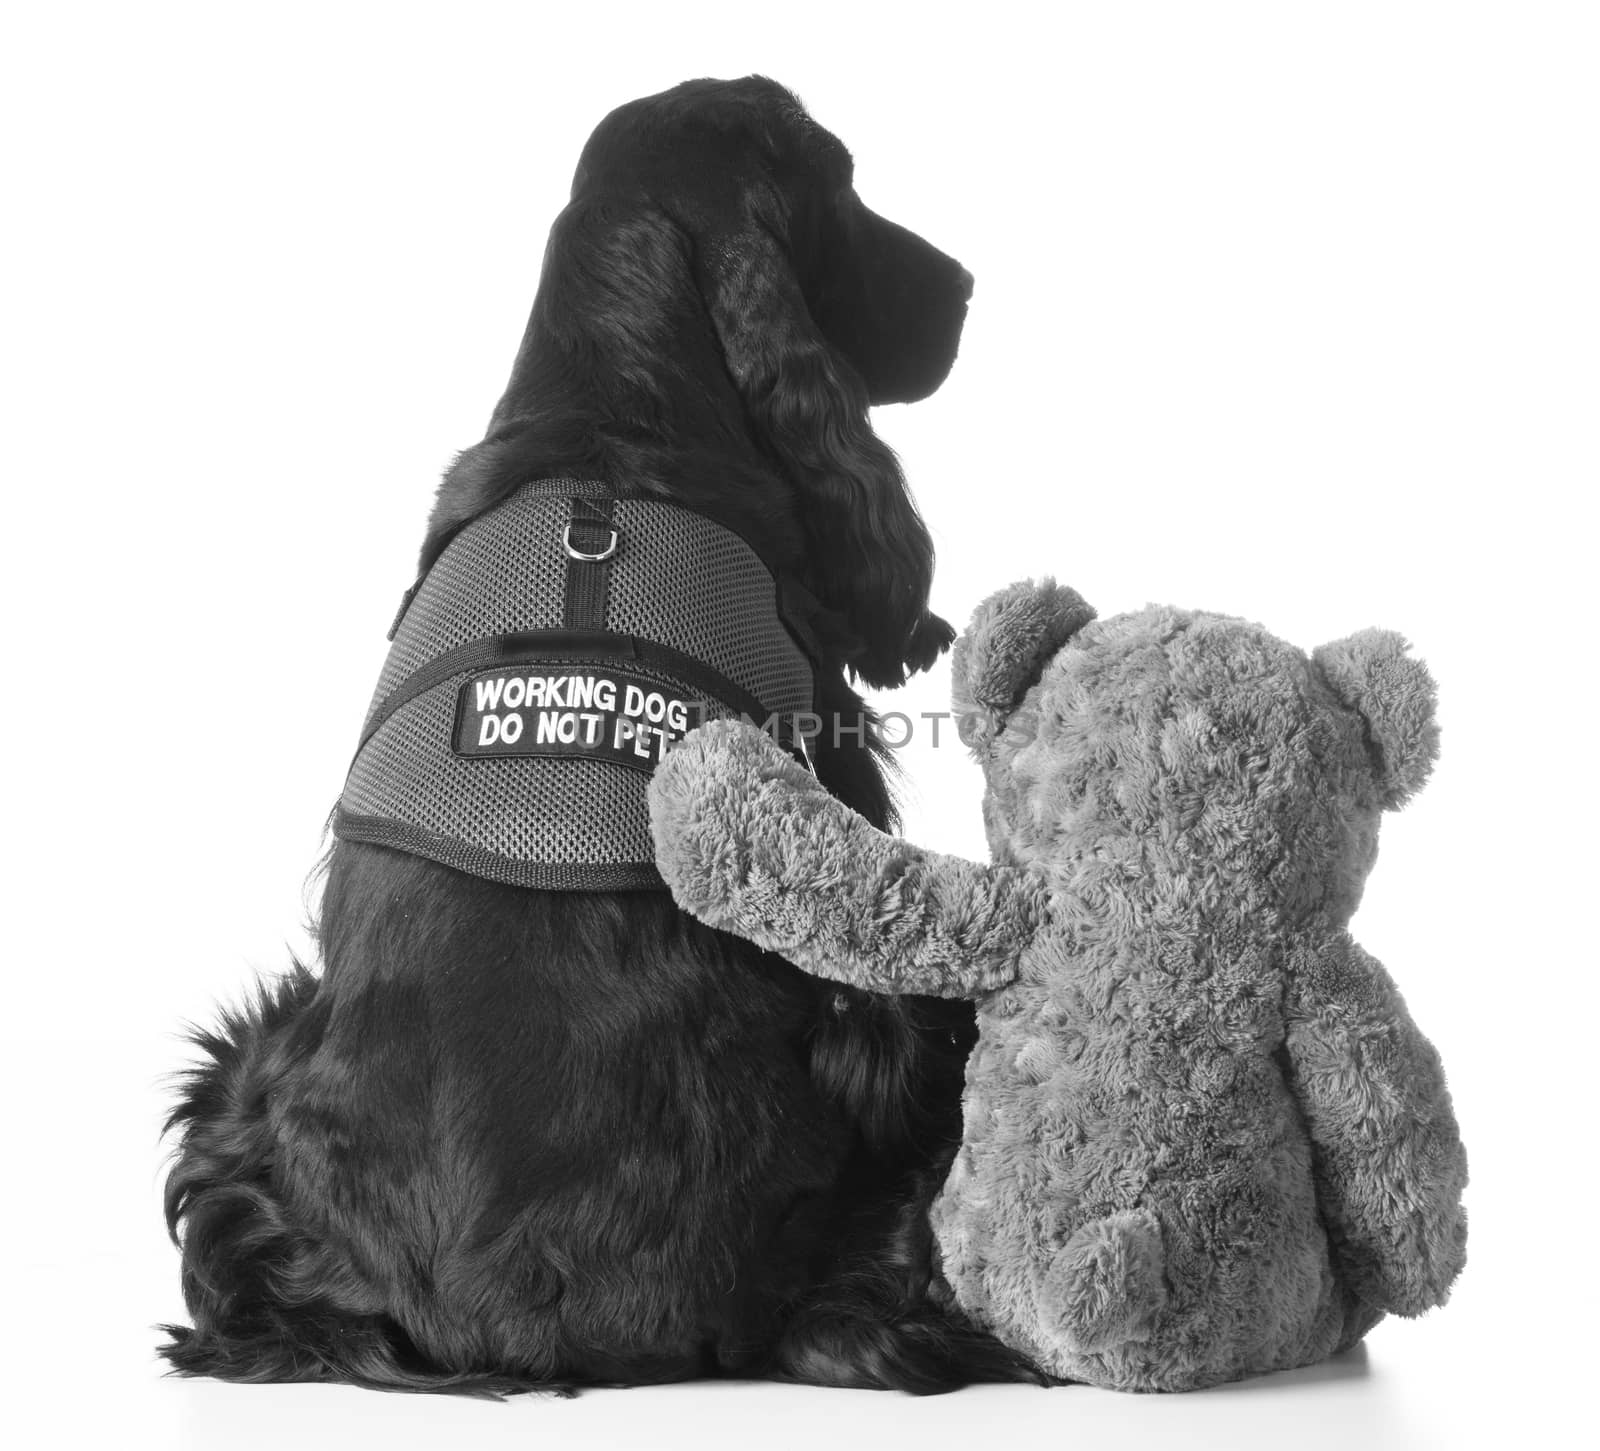 therapy dog sitting beside teddy bear on white background